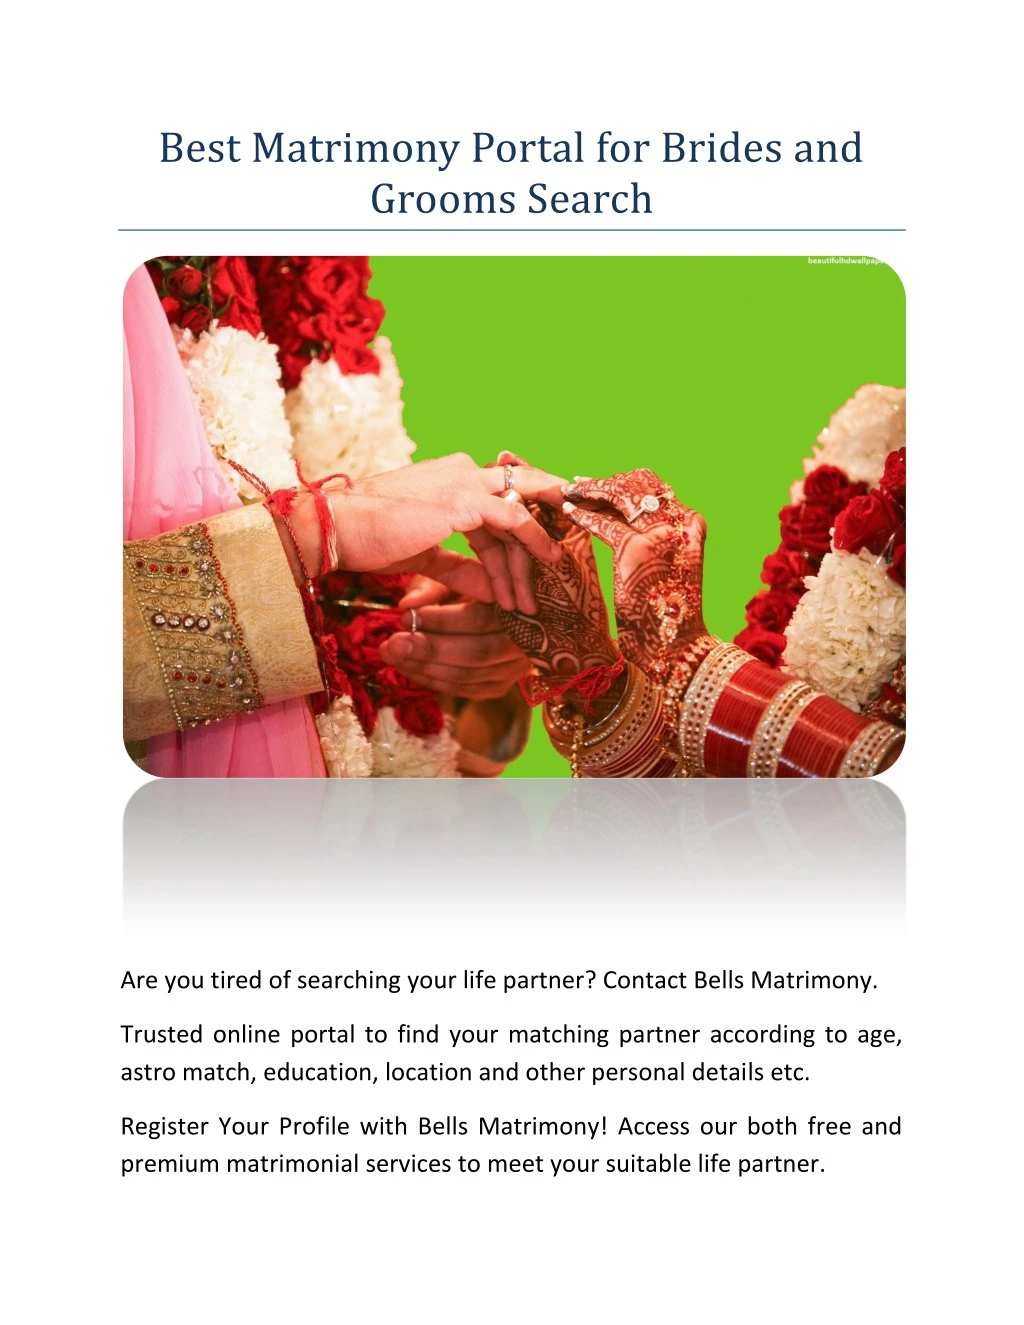 best matrimony portal for brides and grooms search